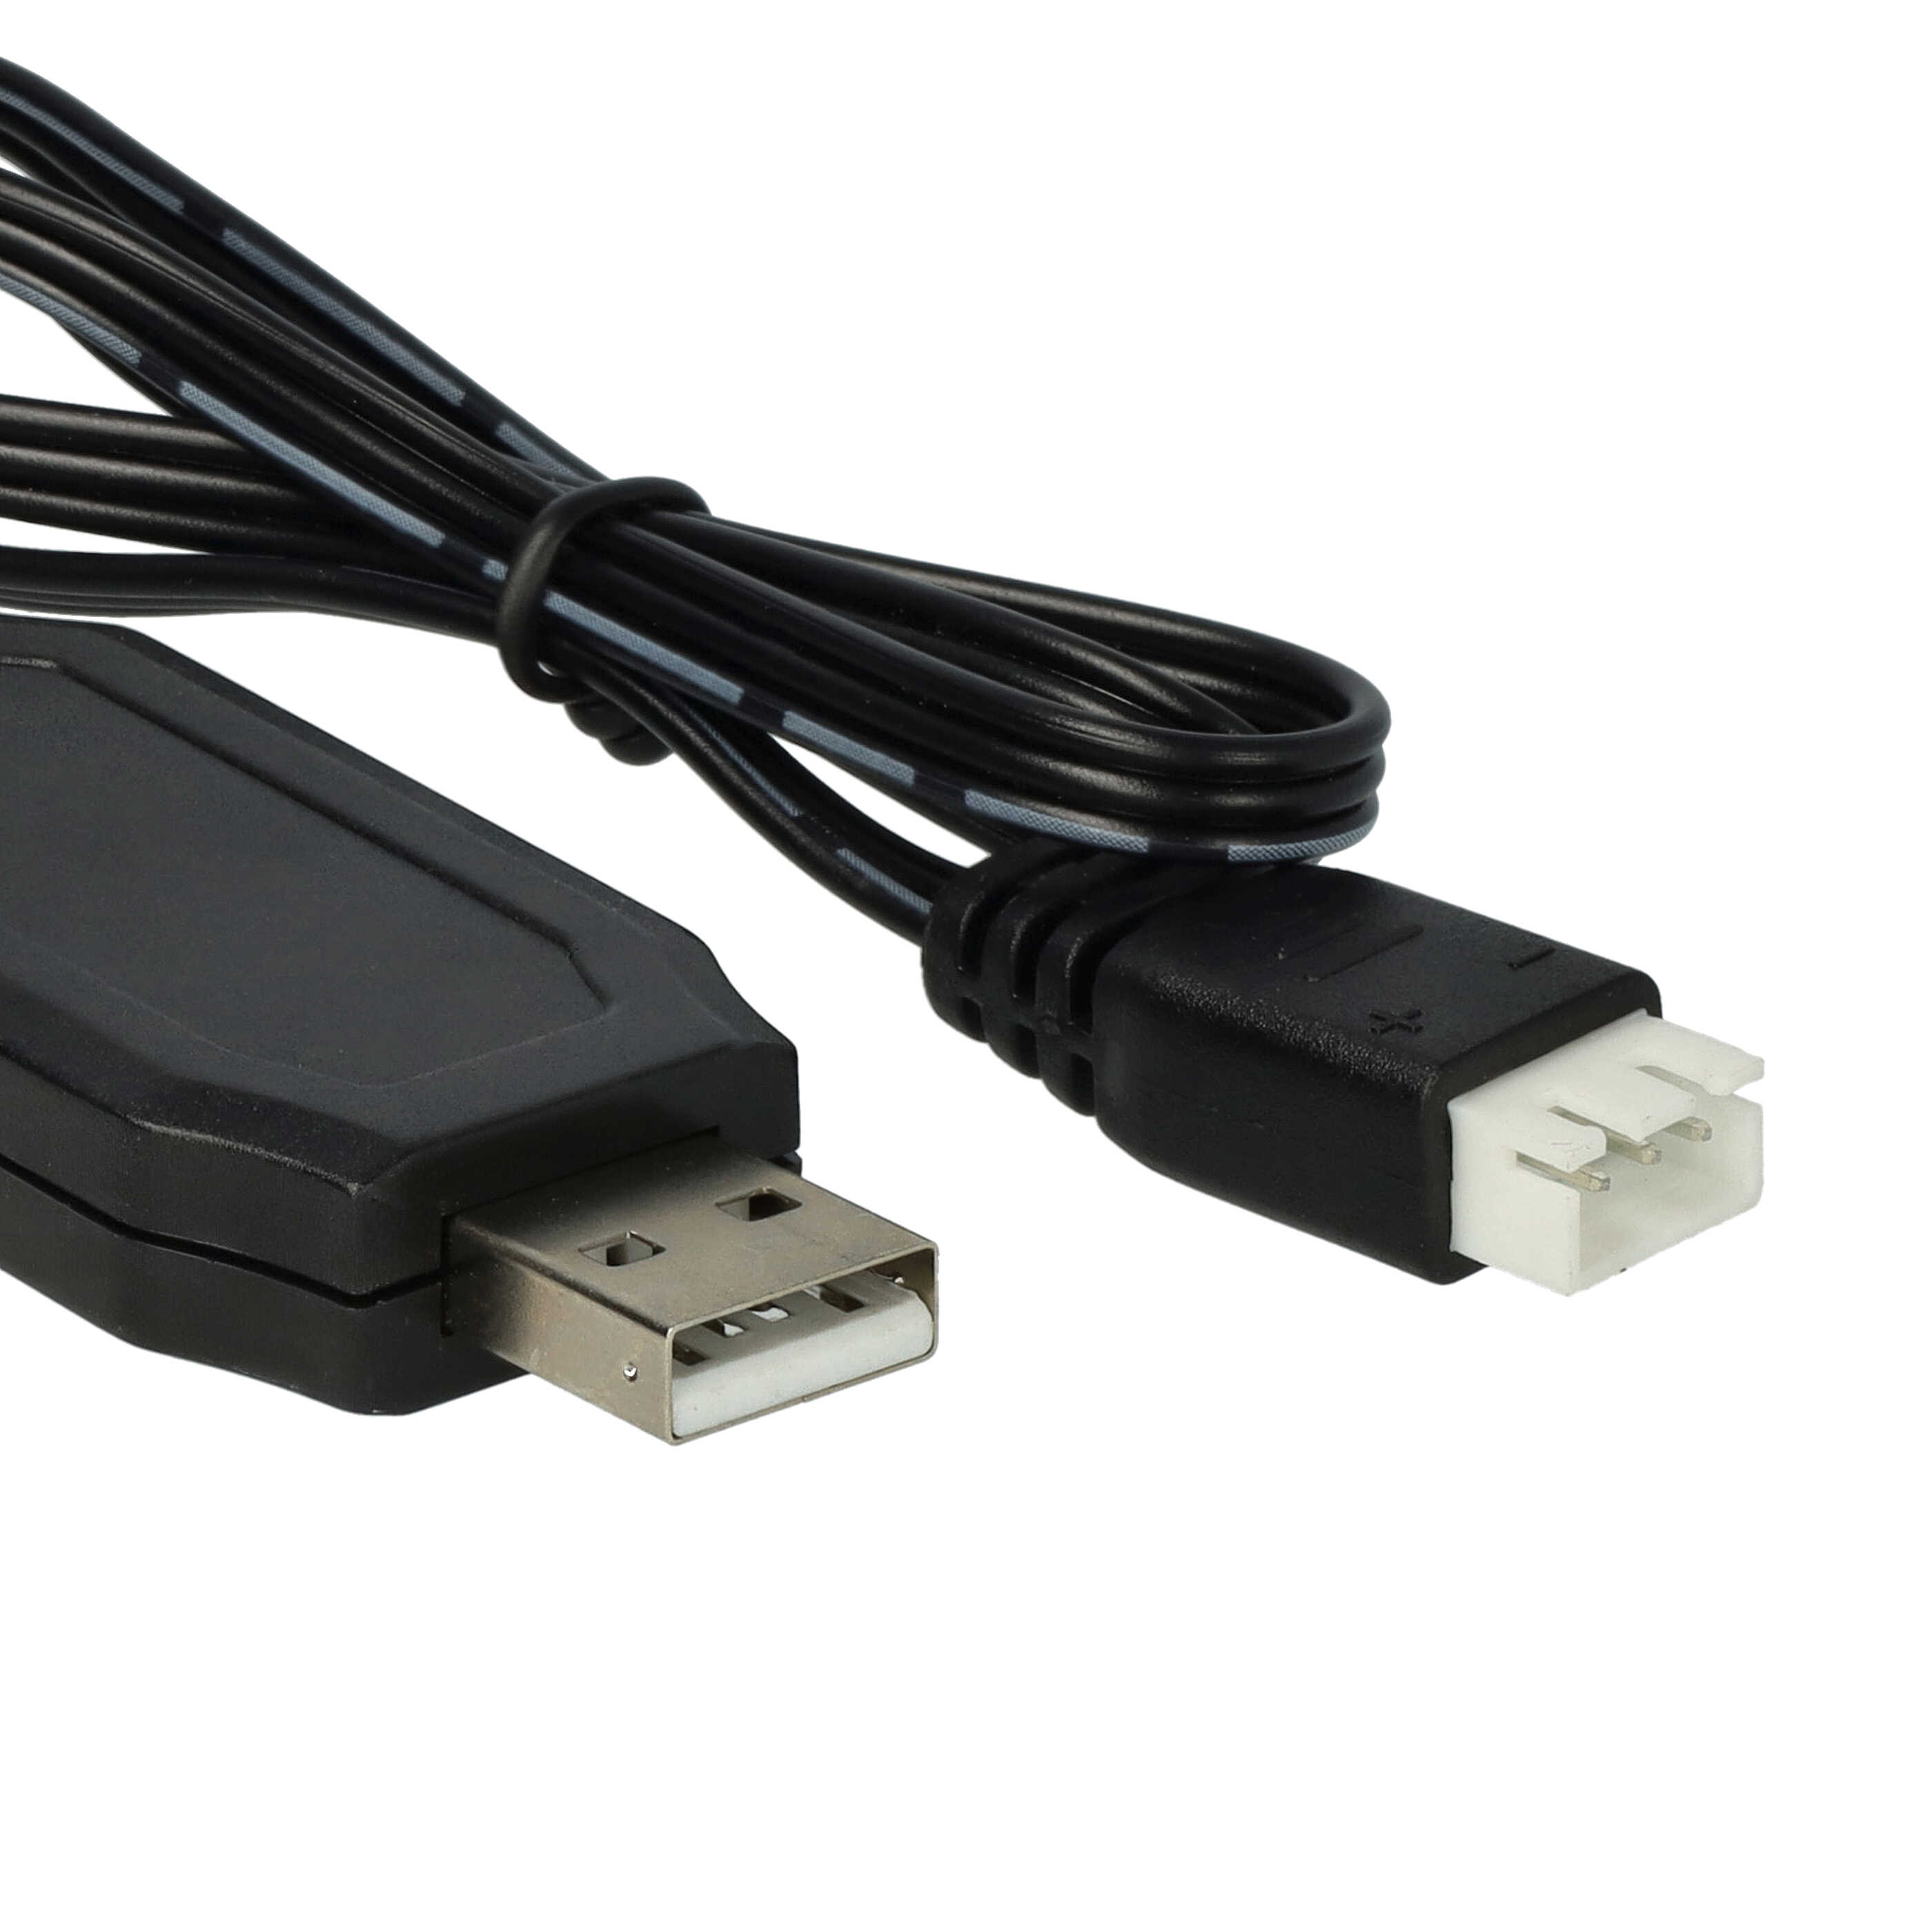 USB Charging Cable suitable for RC Batteries with JST XH-3P Connector, RC Model Making Battery Packs - 60 cm 4